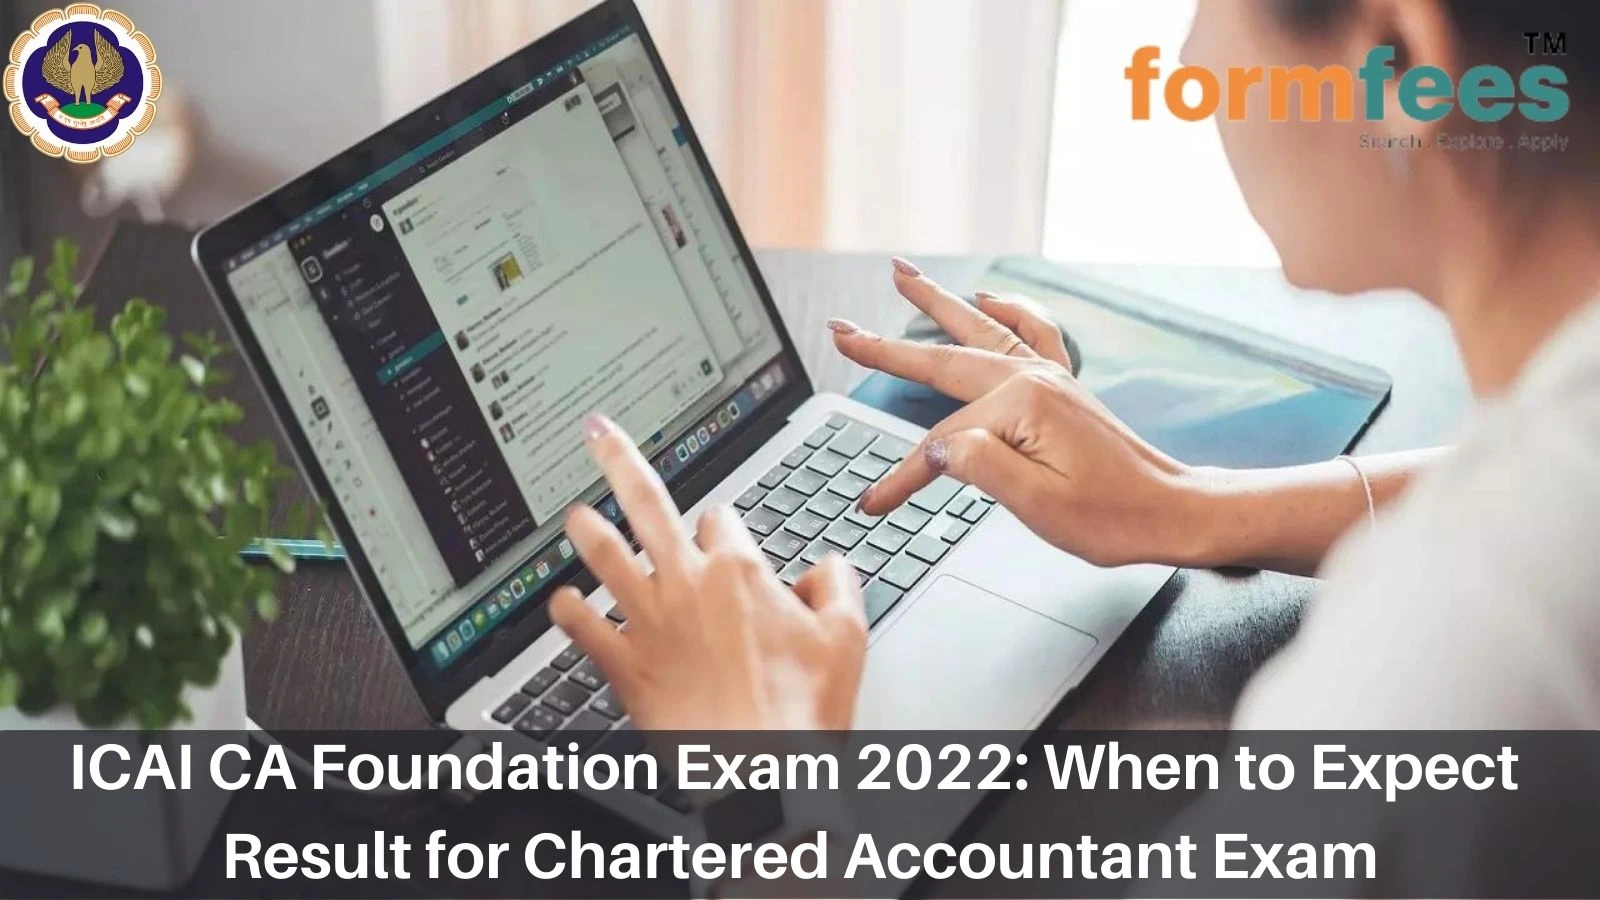 ICAI CA Foundation Exam 2022: When to Expect Result for Chartered Accountant Exam